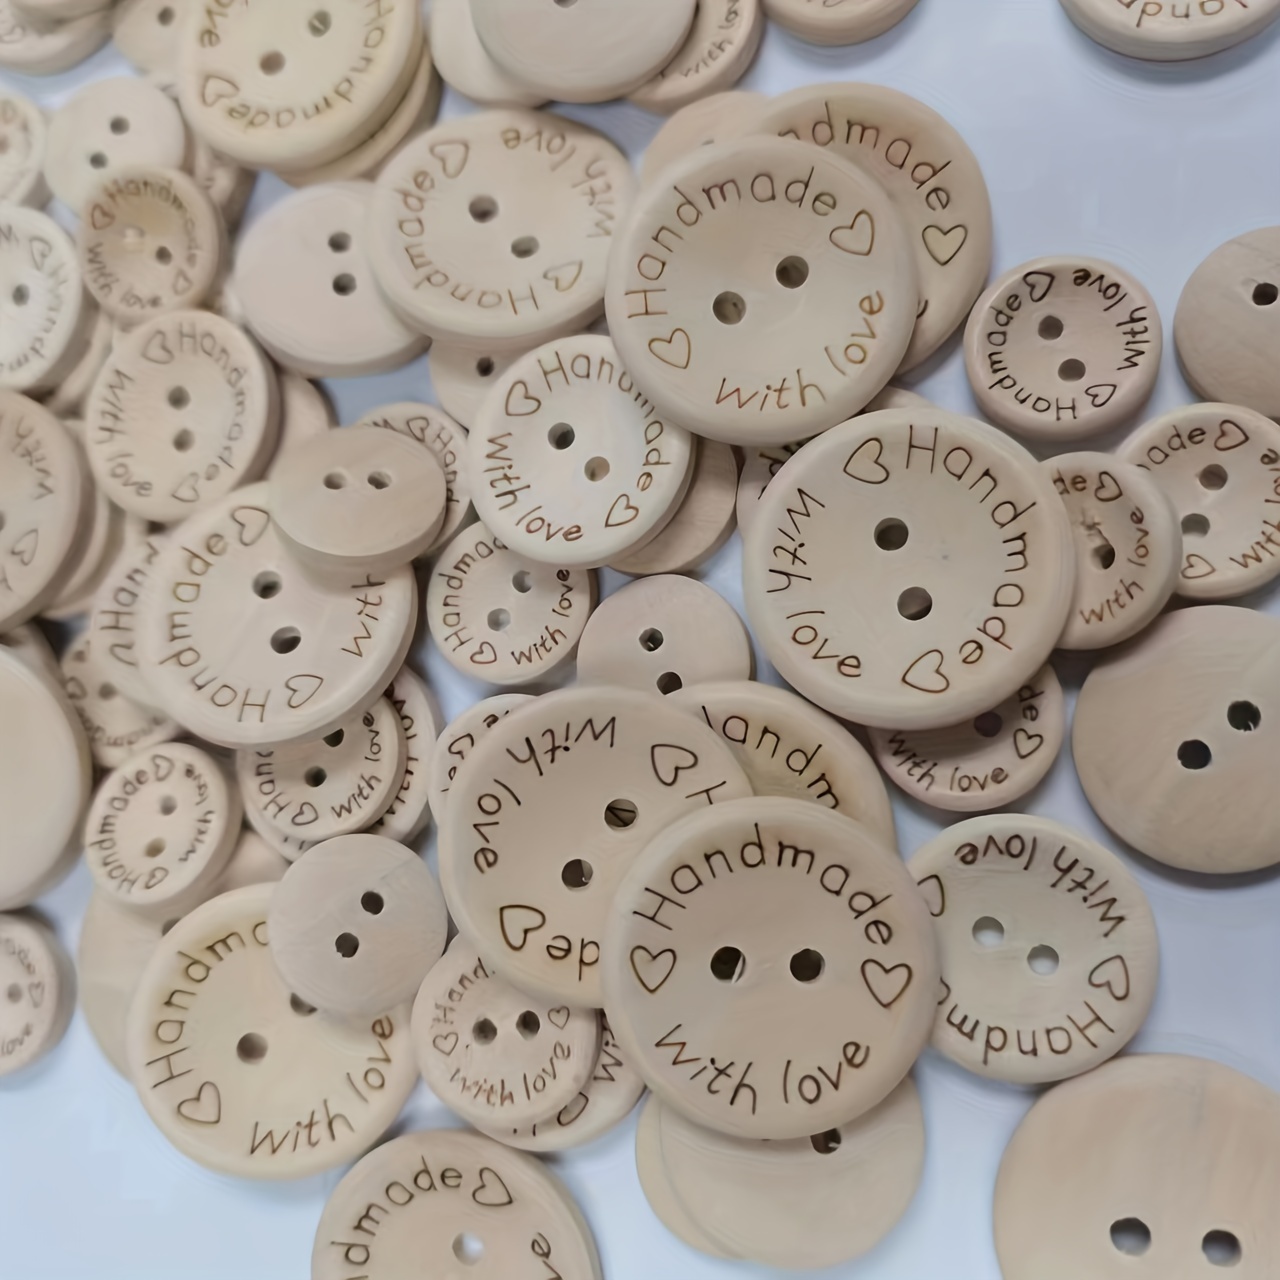 300pcs Mixed Round Wooden Colorful Buttons Crafting Buttons With 2 Holes  For Arts Knitting Sewing Di